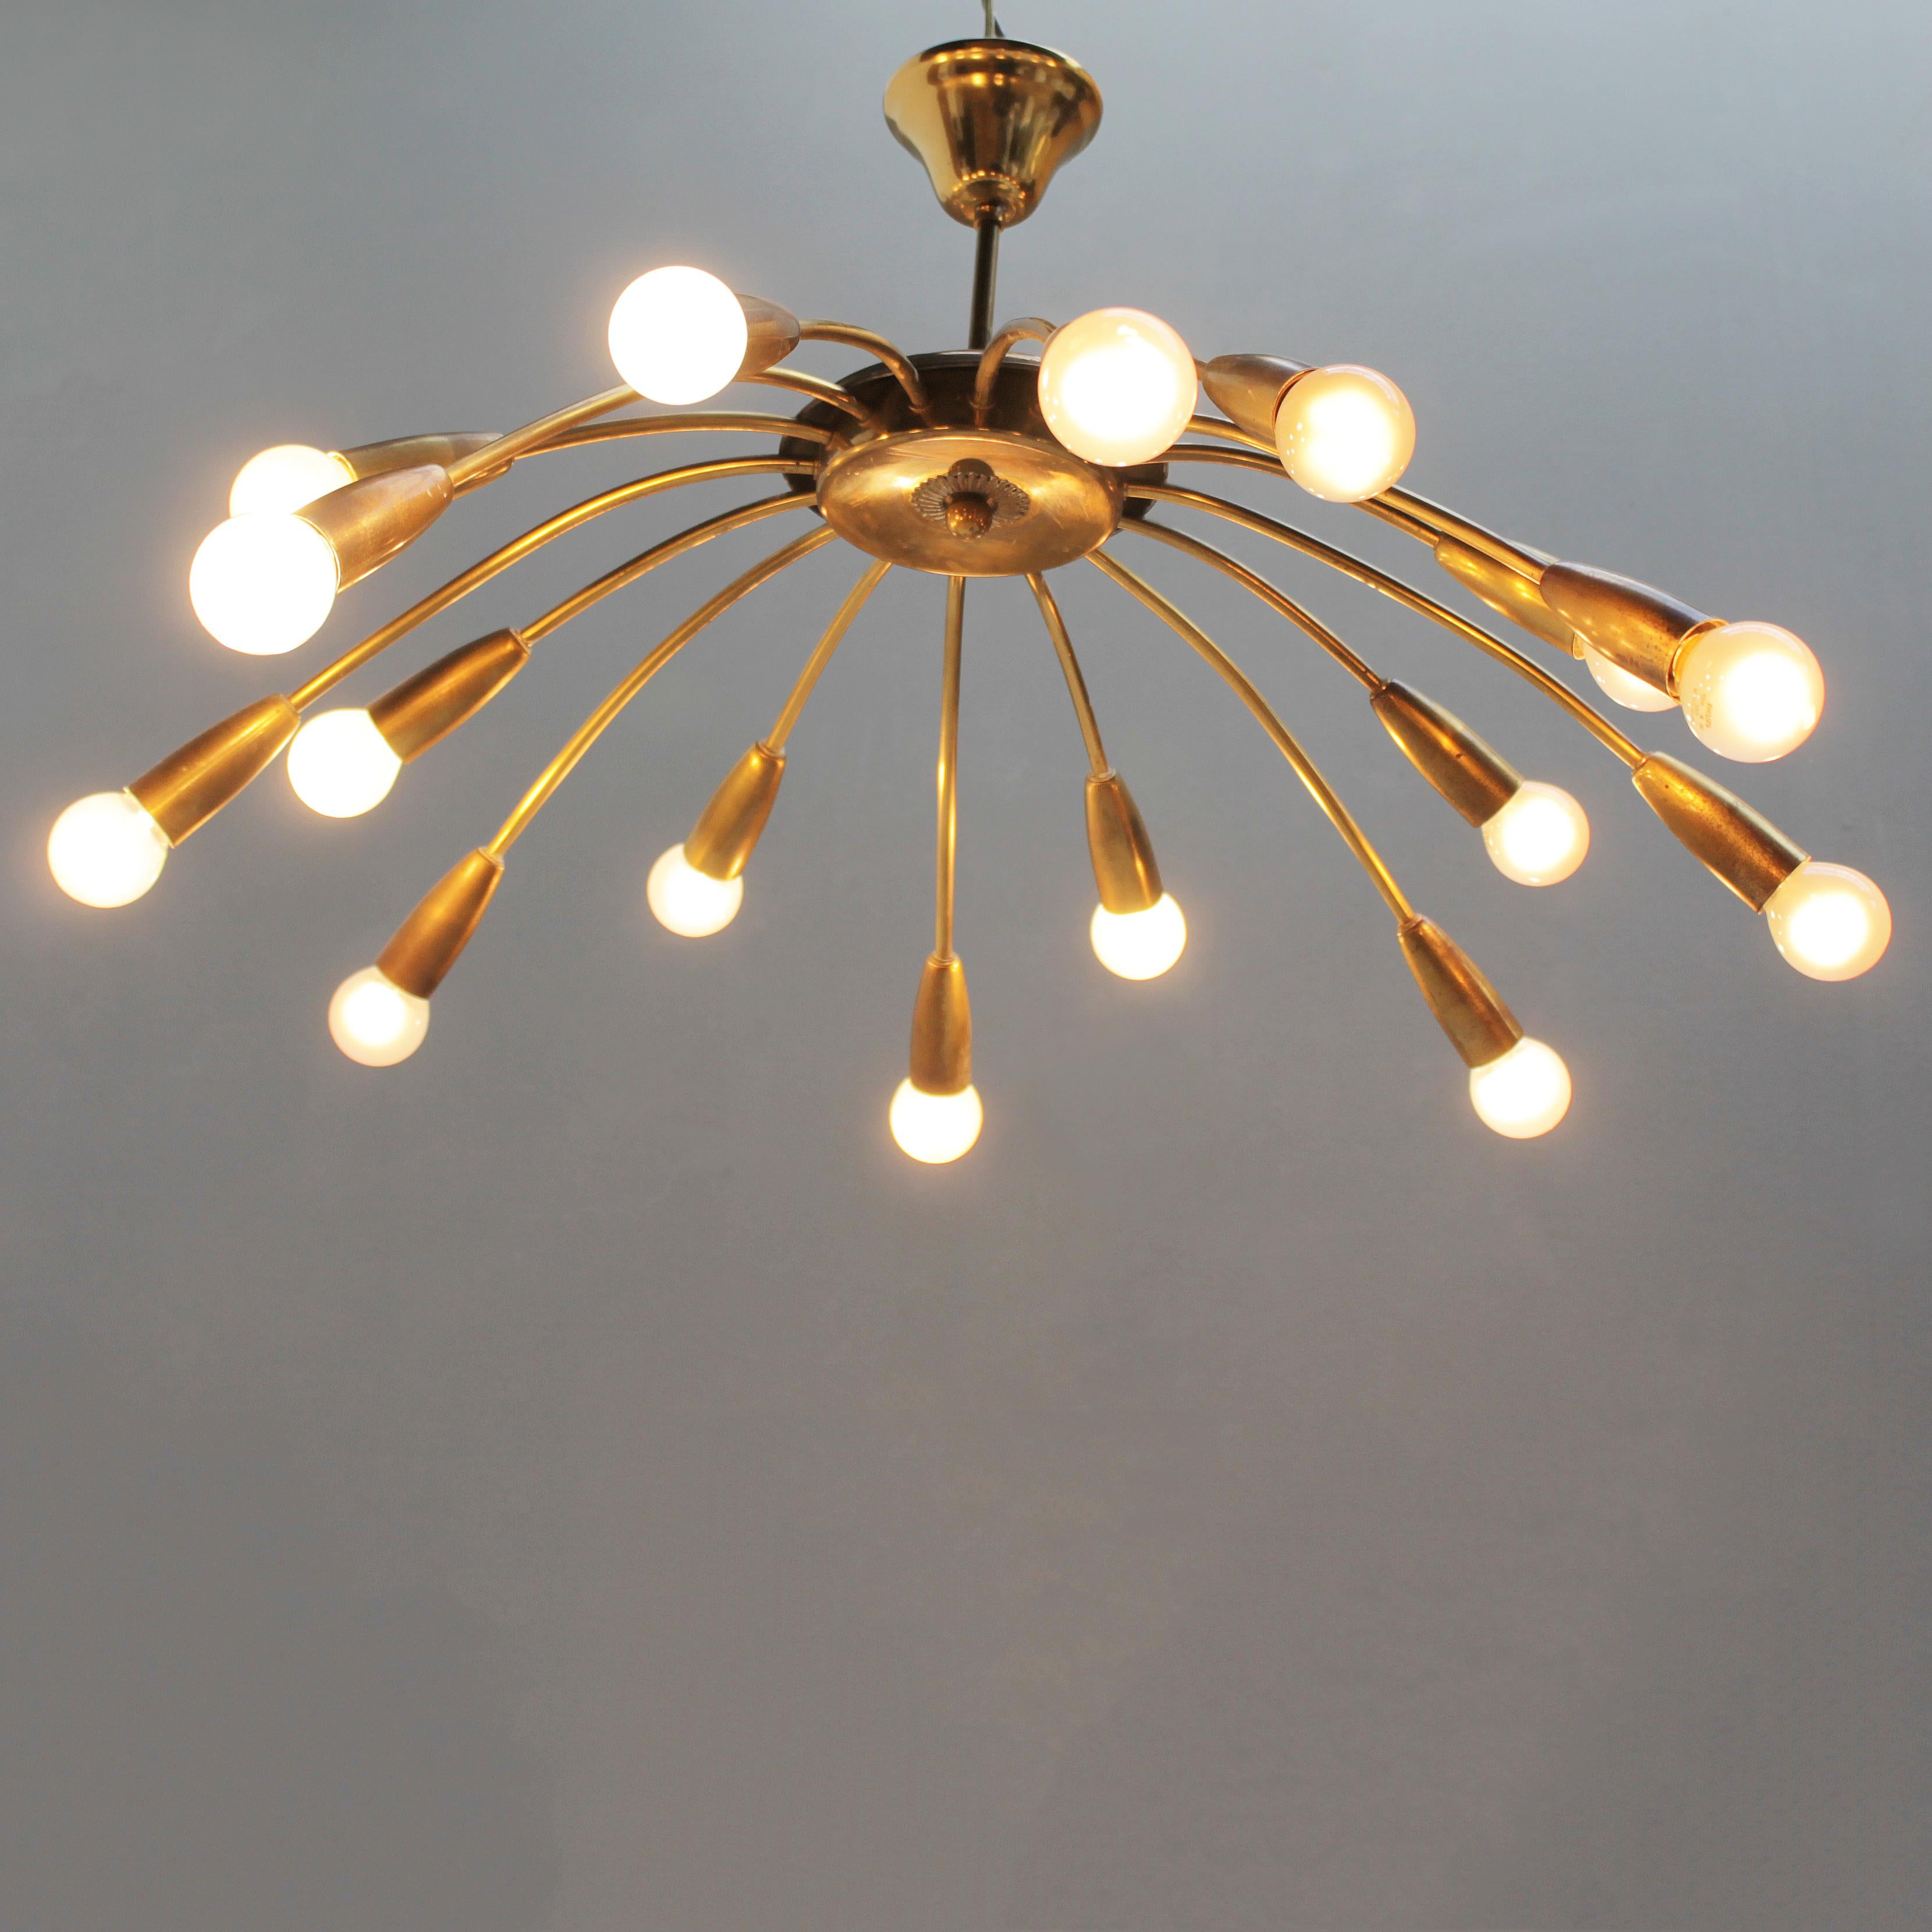 Attractive Italian midcentury chandelier executed in brass. The light has got sixteen arms, alternately long and short. The fixture is equipped small Edison screw (SES), (E17 14-17 mm max 25 watt) lamp holders, which can be fitted with E17 screw